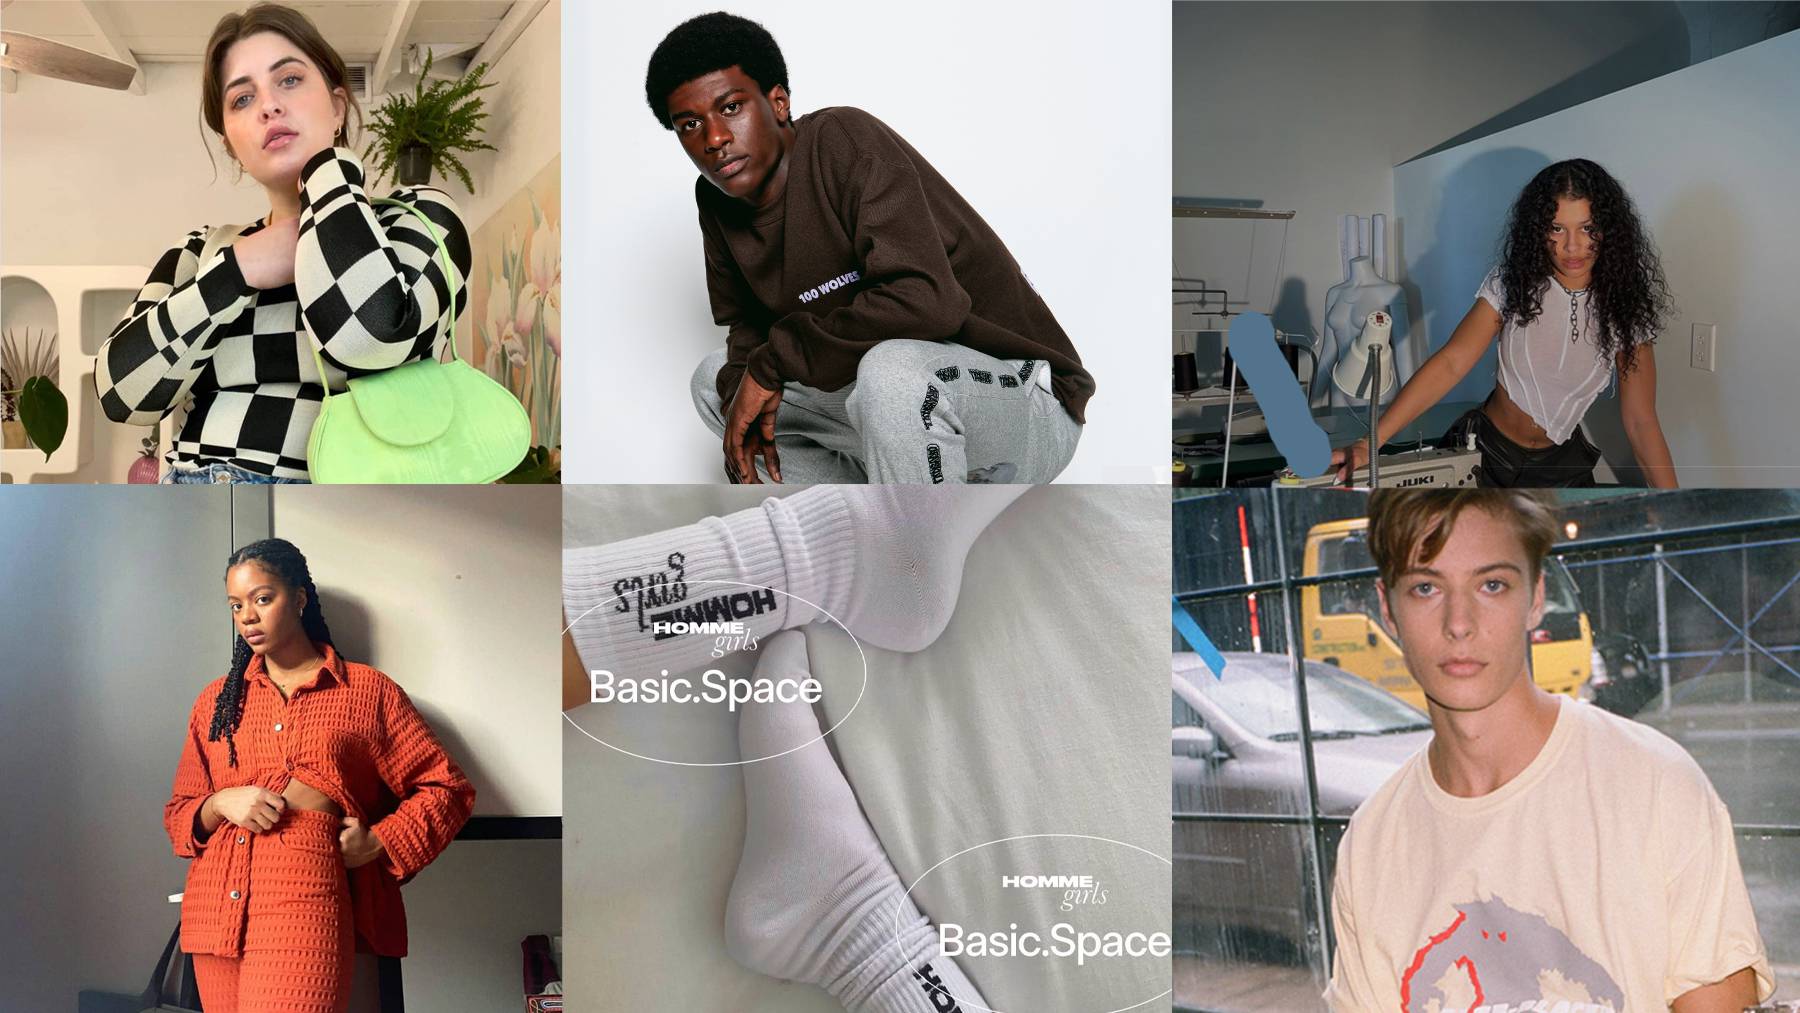 A new wave of retailers are relying on influencers to help curate their merchandise mix. Top, from left to right: The Lobby, In-House, Basic Space. Bottom, from left to right: The Lobby, Basic Space, In-House.